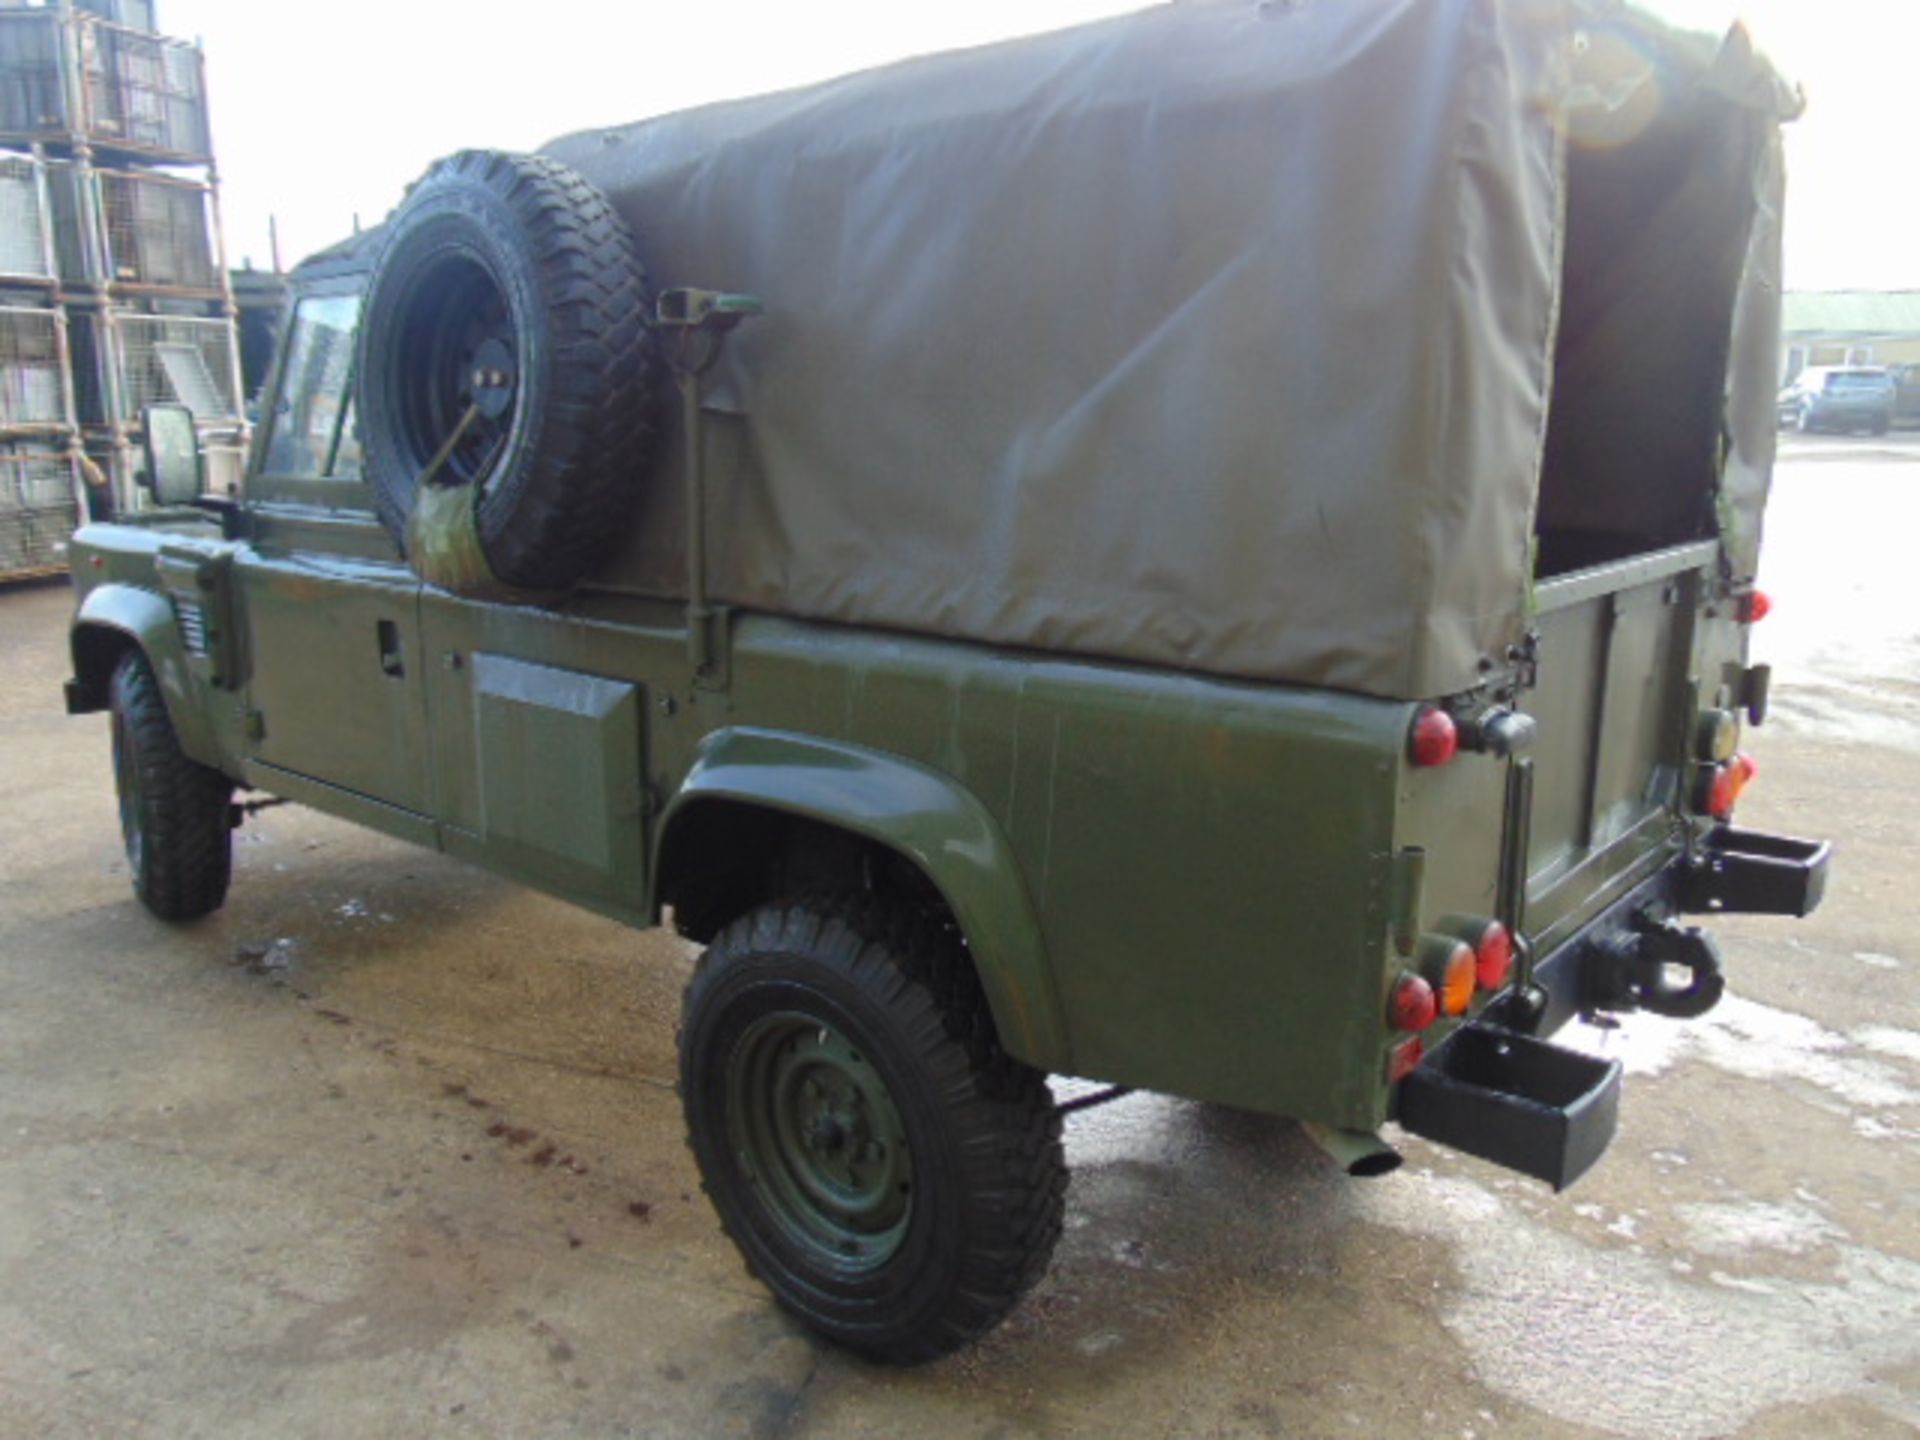 Military Specification Land Rover Wolf 110 Soft Top FFR - Image 5 of 25